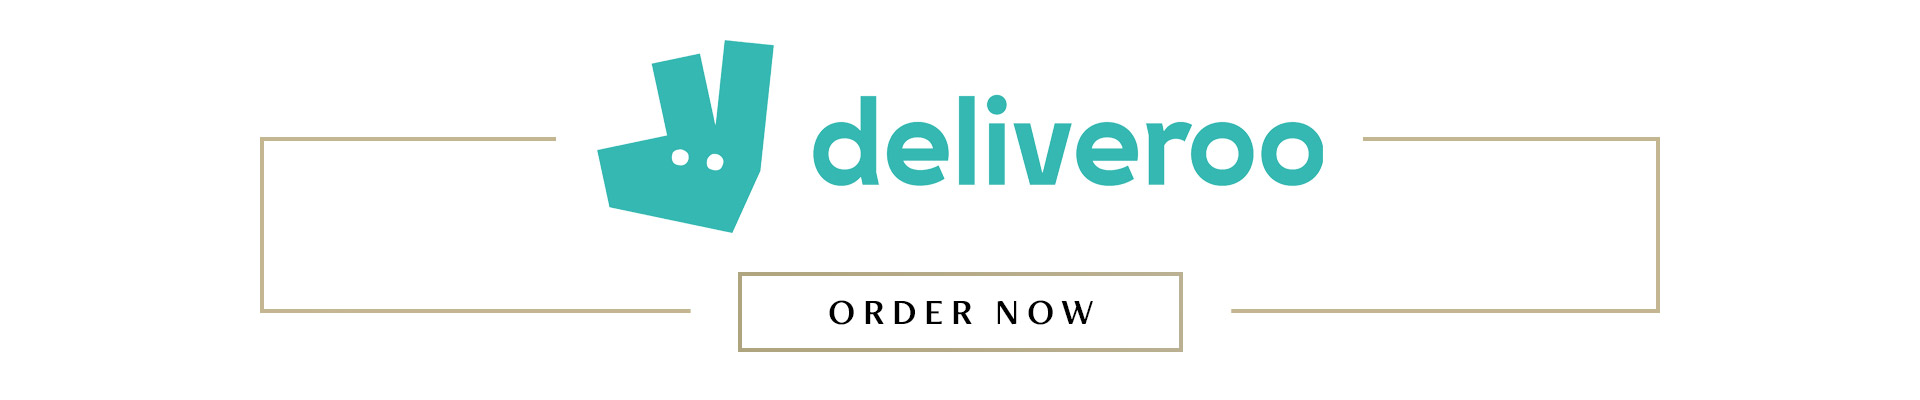 browns-deliveroo-both-banner-thin.jpeg